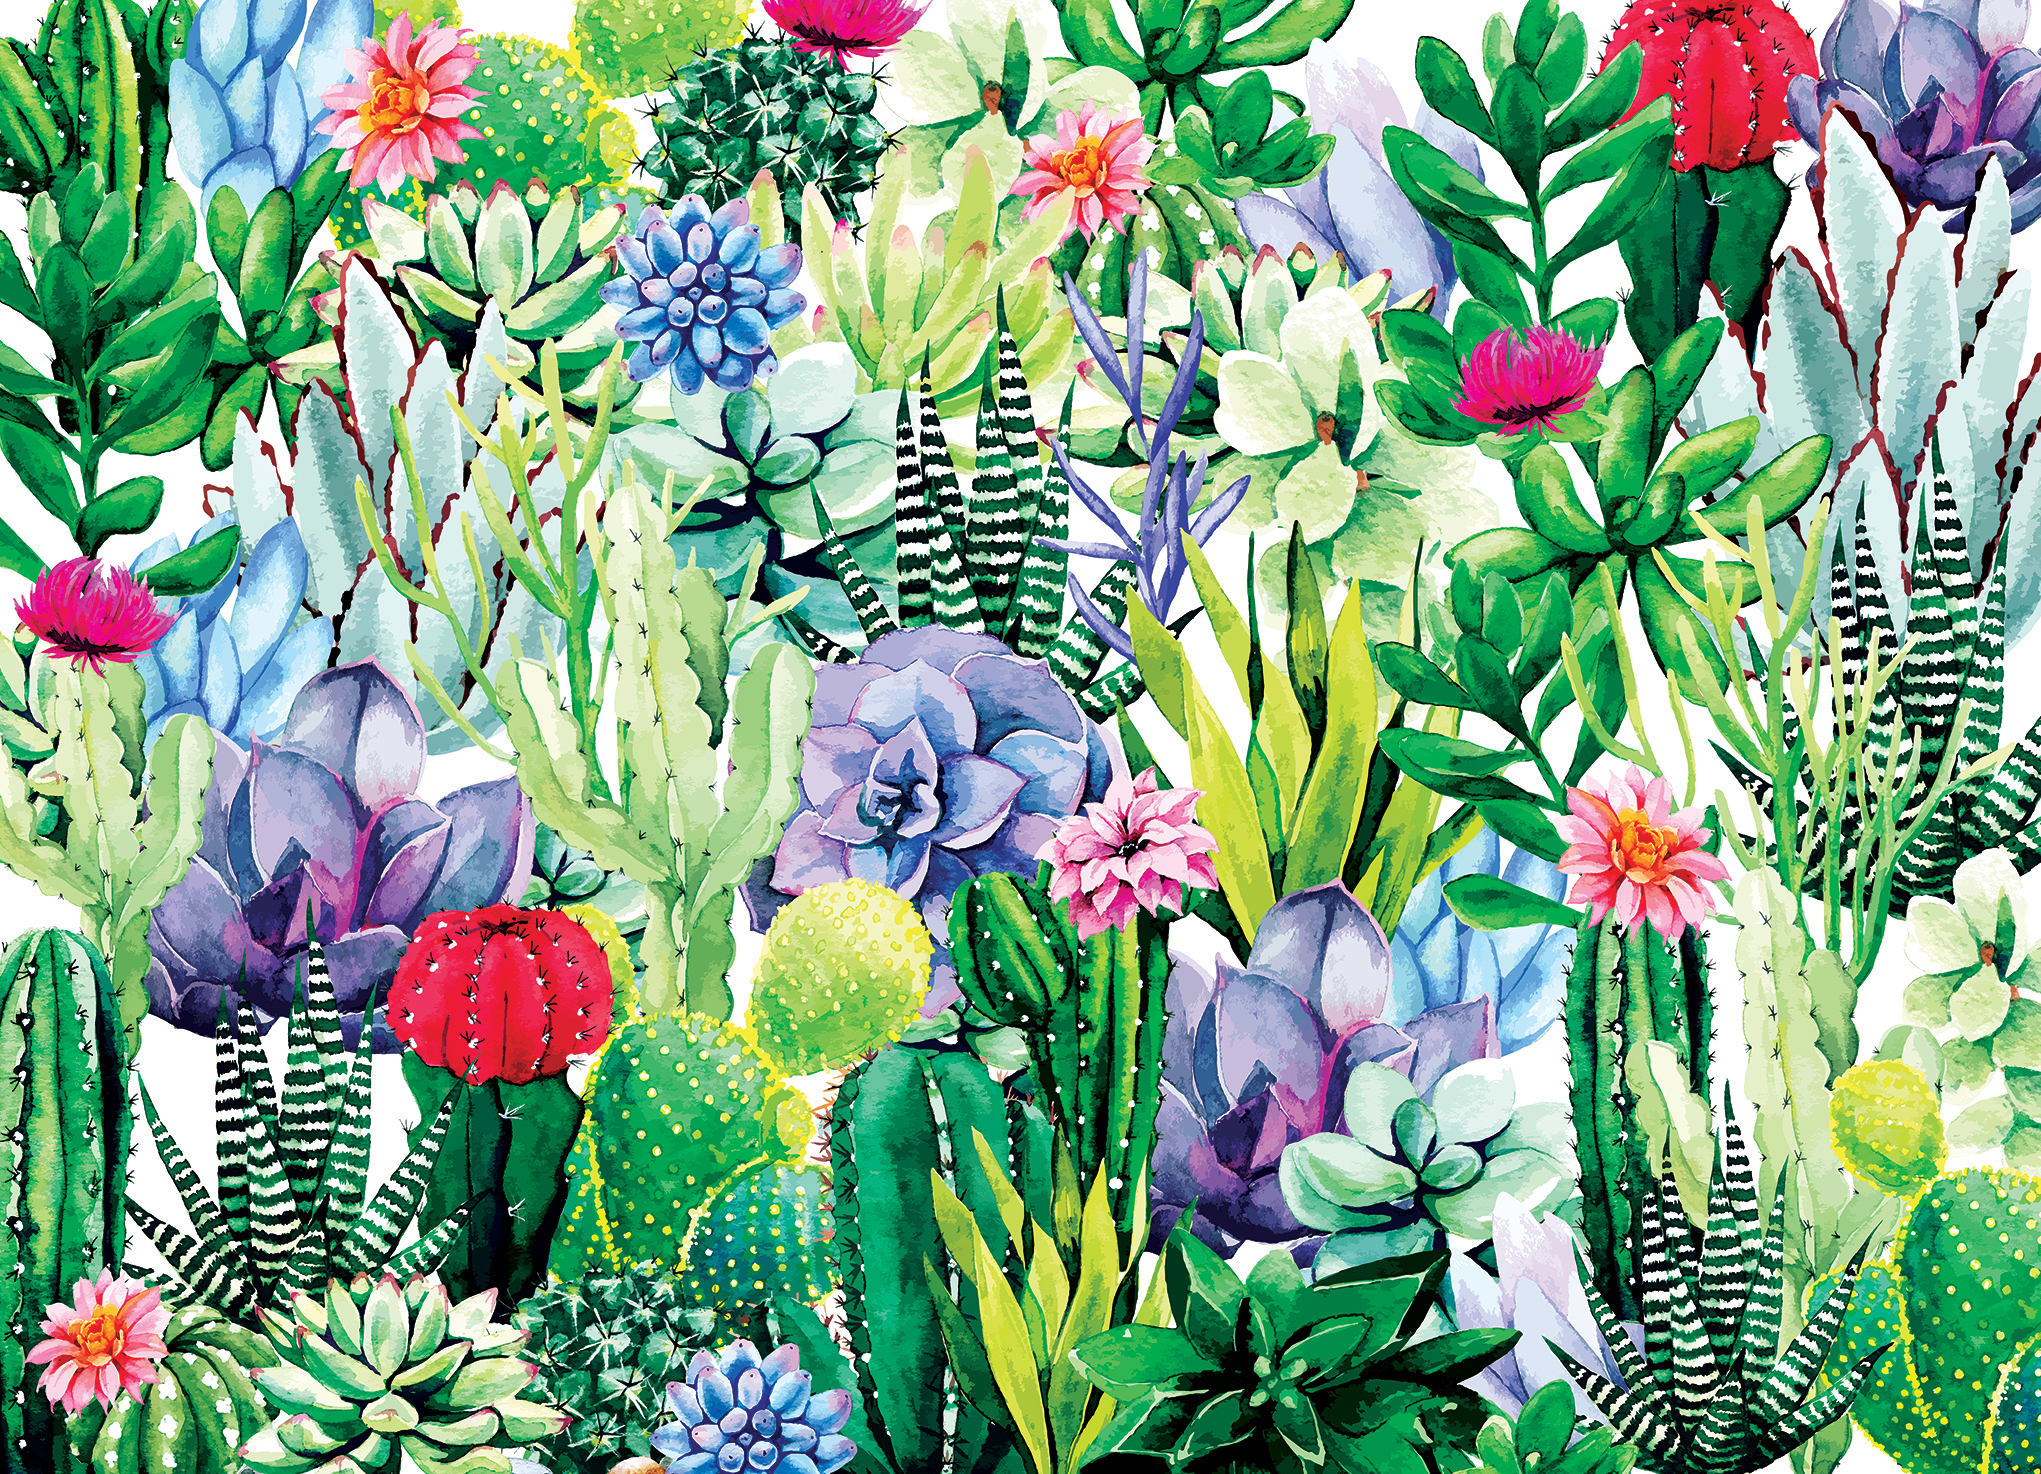 Cactus 1000 piece puzzle for adults - Unique Puzzles for adults 1000 pieces and up With Droplet Technology For Anti Glare & Soft Touch - 27.5"Lx19.5"W